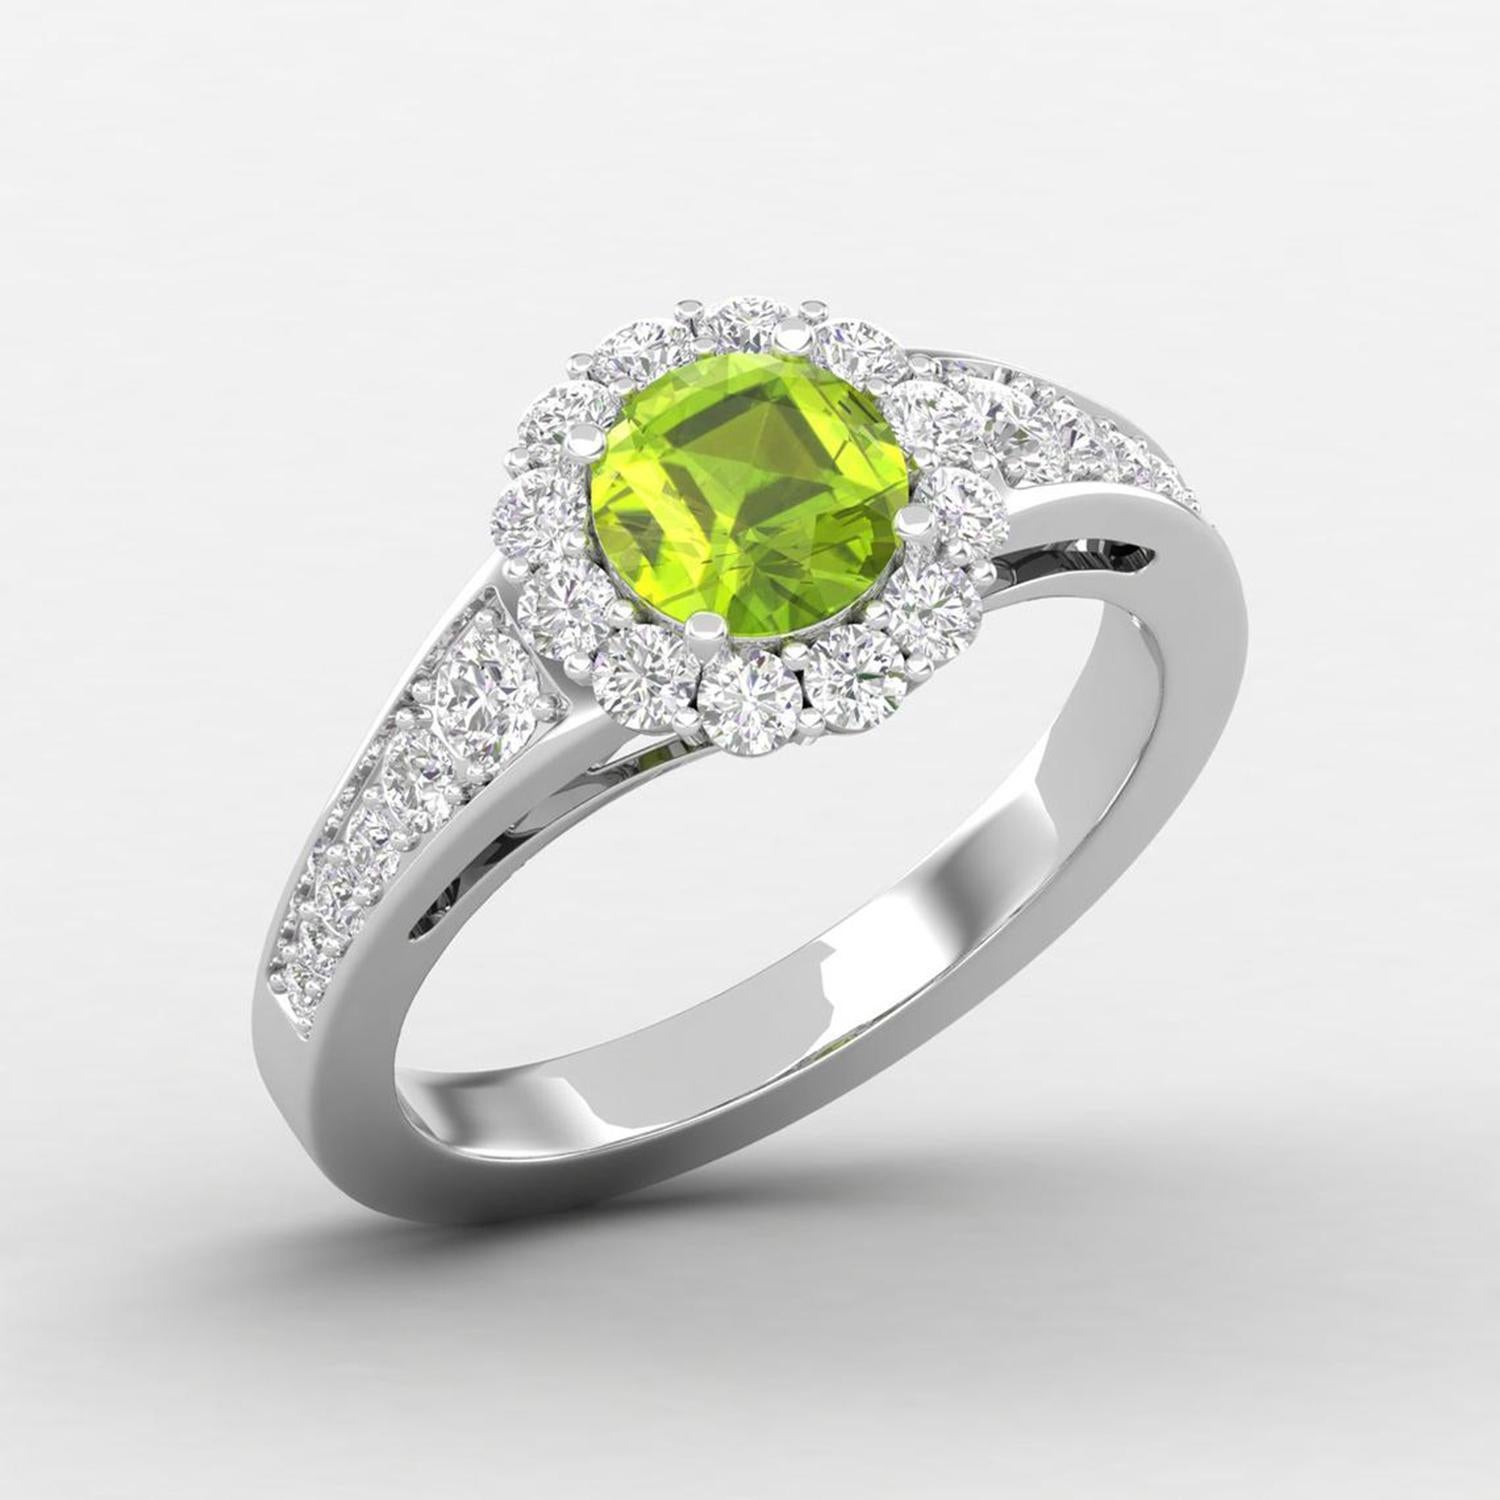 Round Cut 14 Karat Gold Round Peridot Ring / Round Diamond Ring / Solitaire Ring For Sale